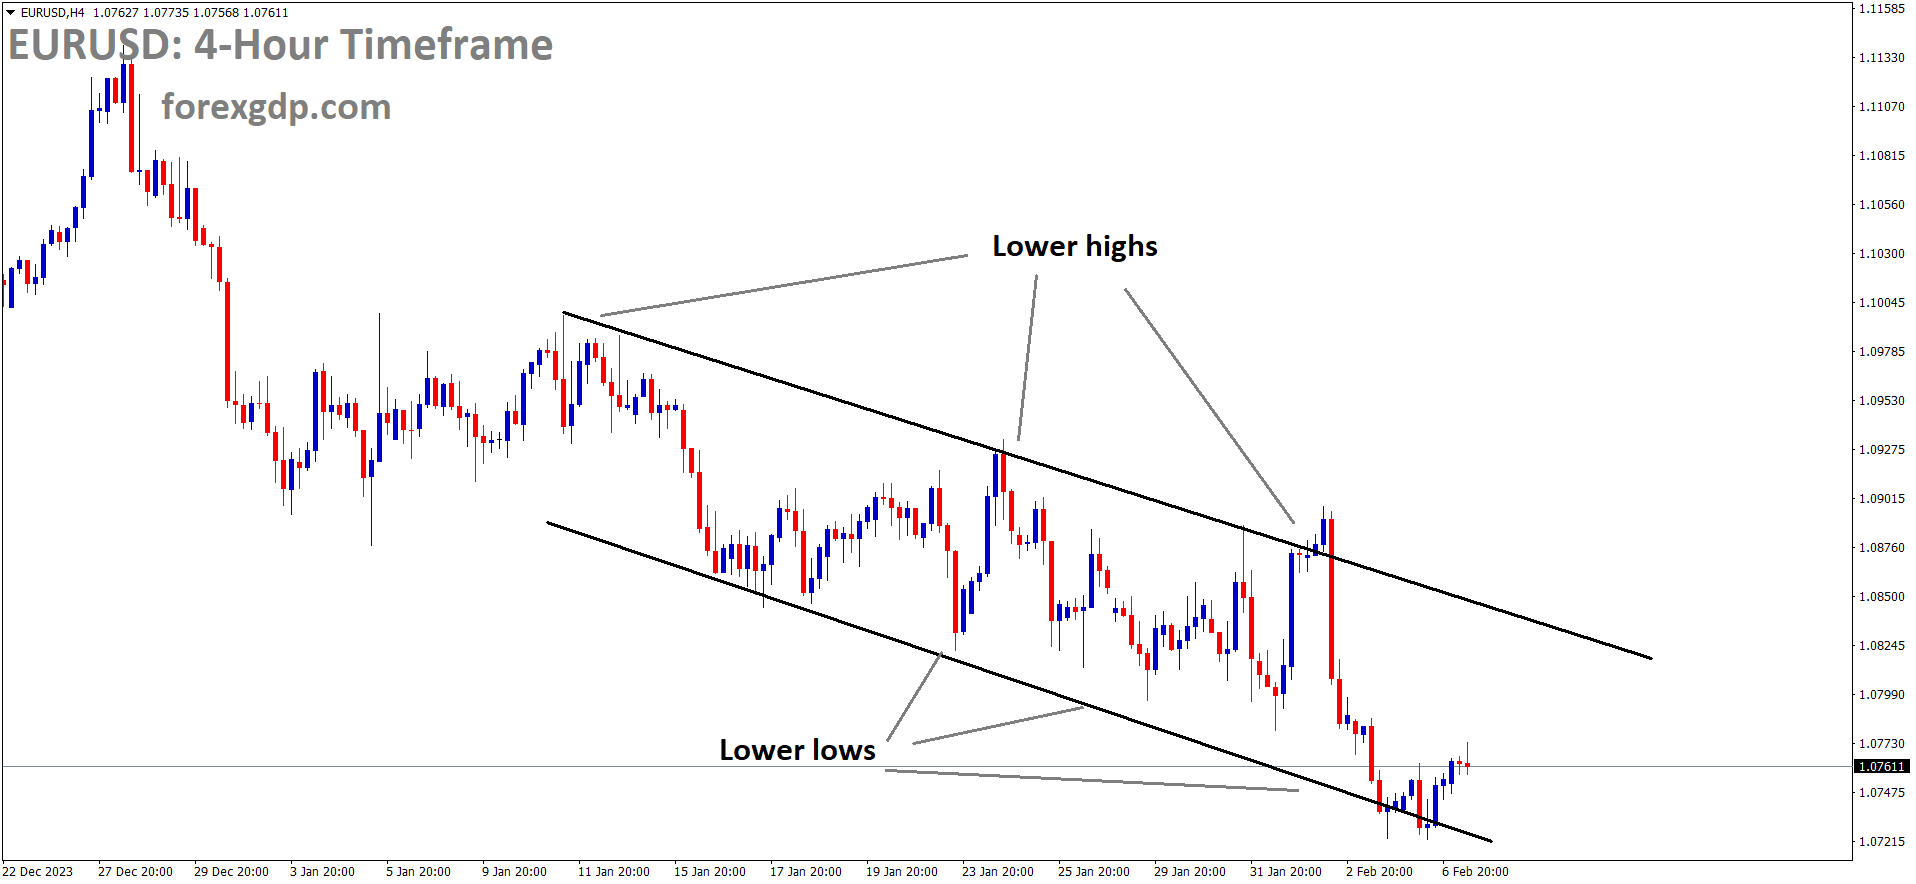 EURUSD is moving in the Descending channel and the market has reached the lower low area of the channel